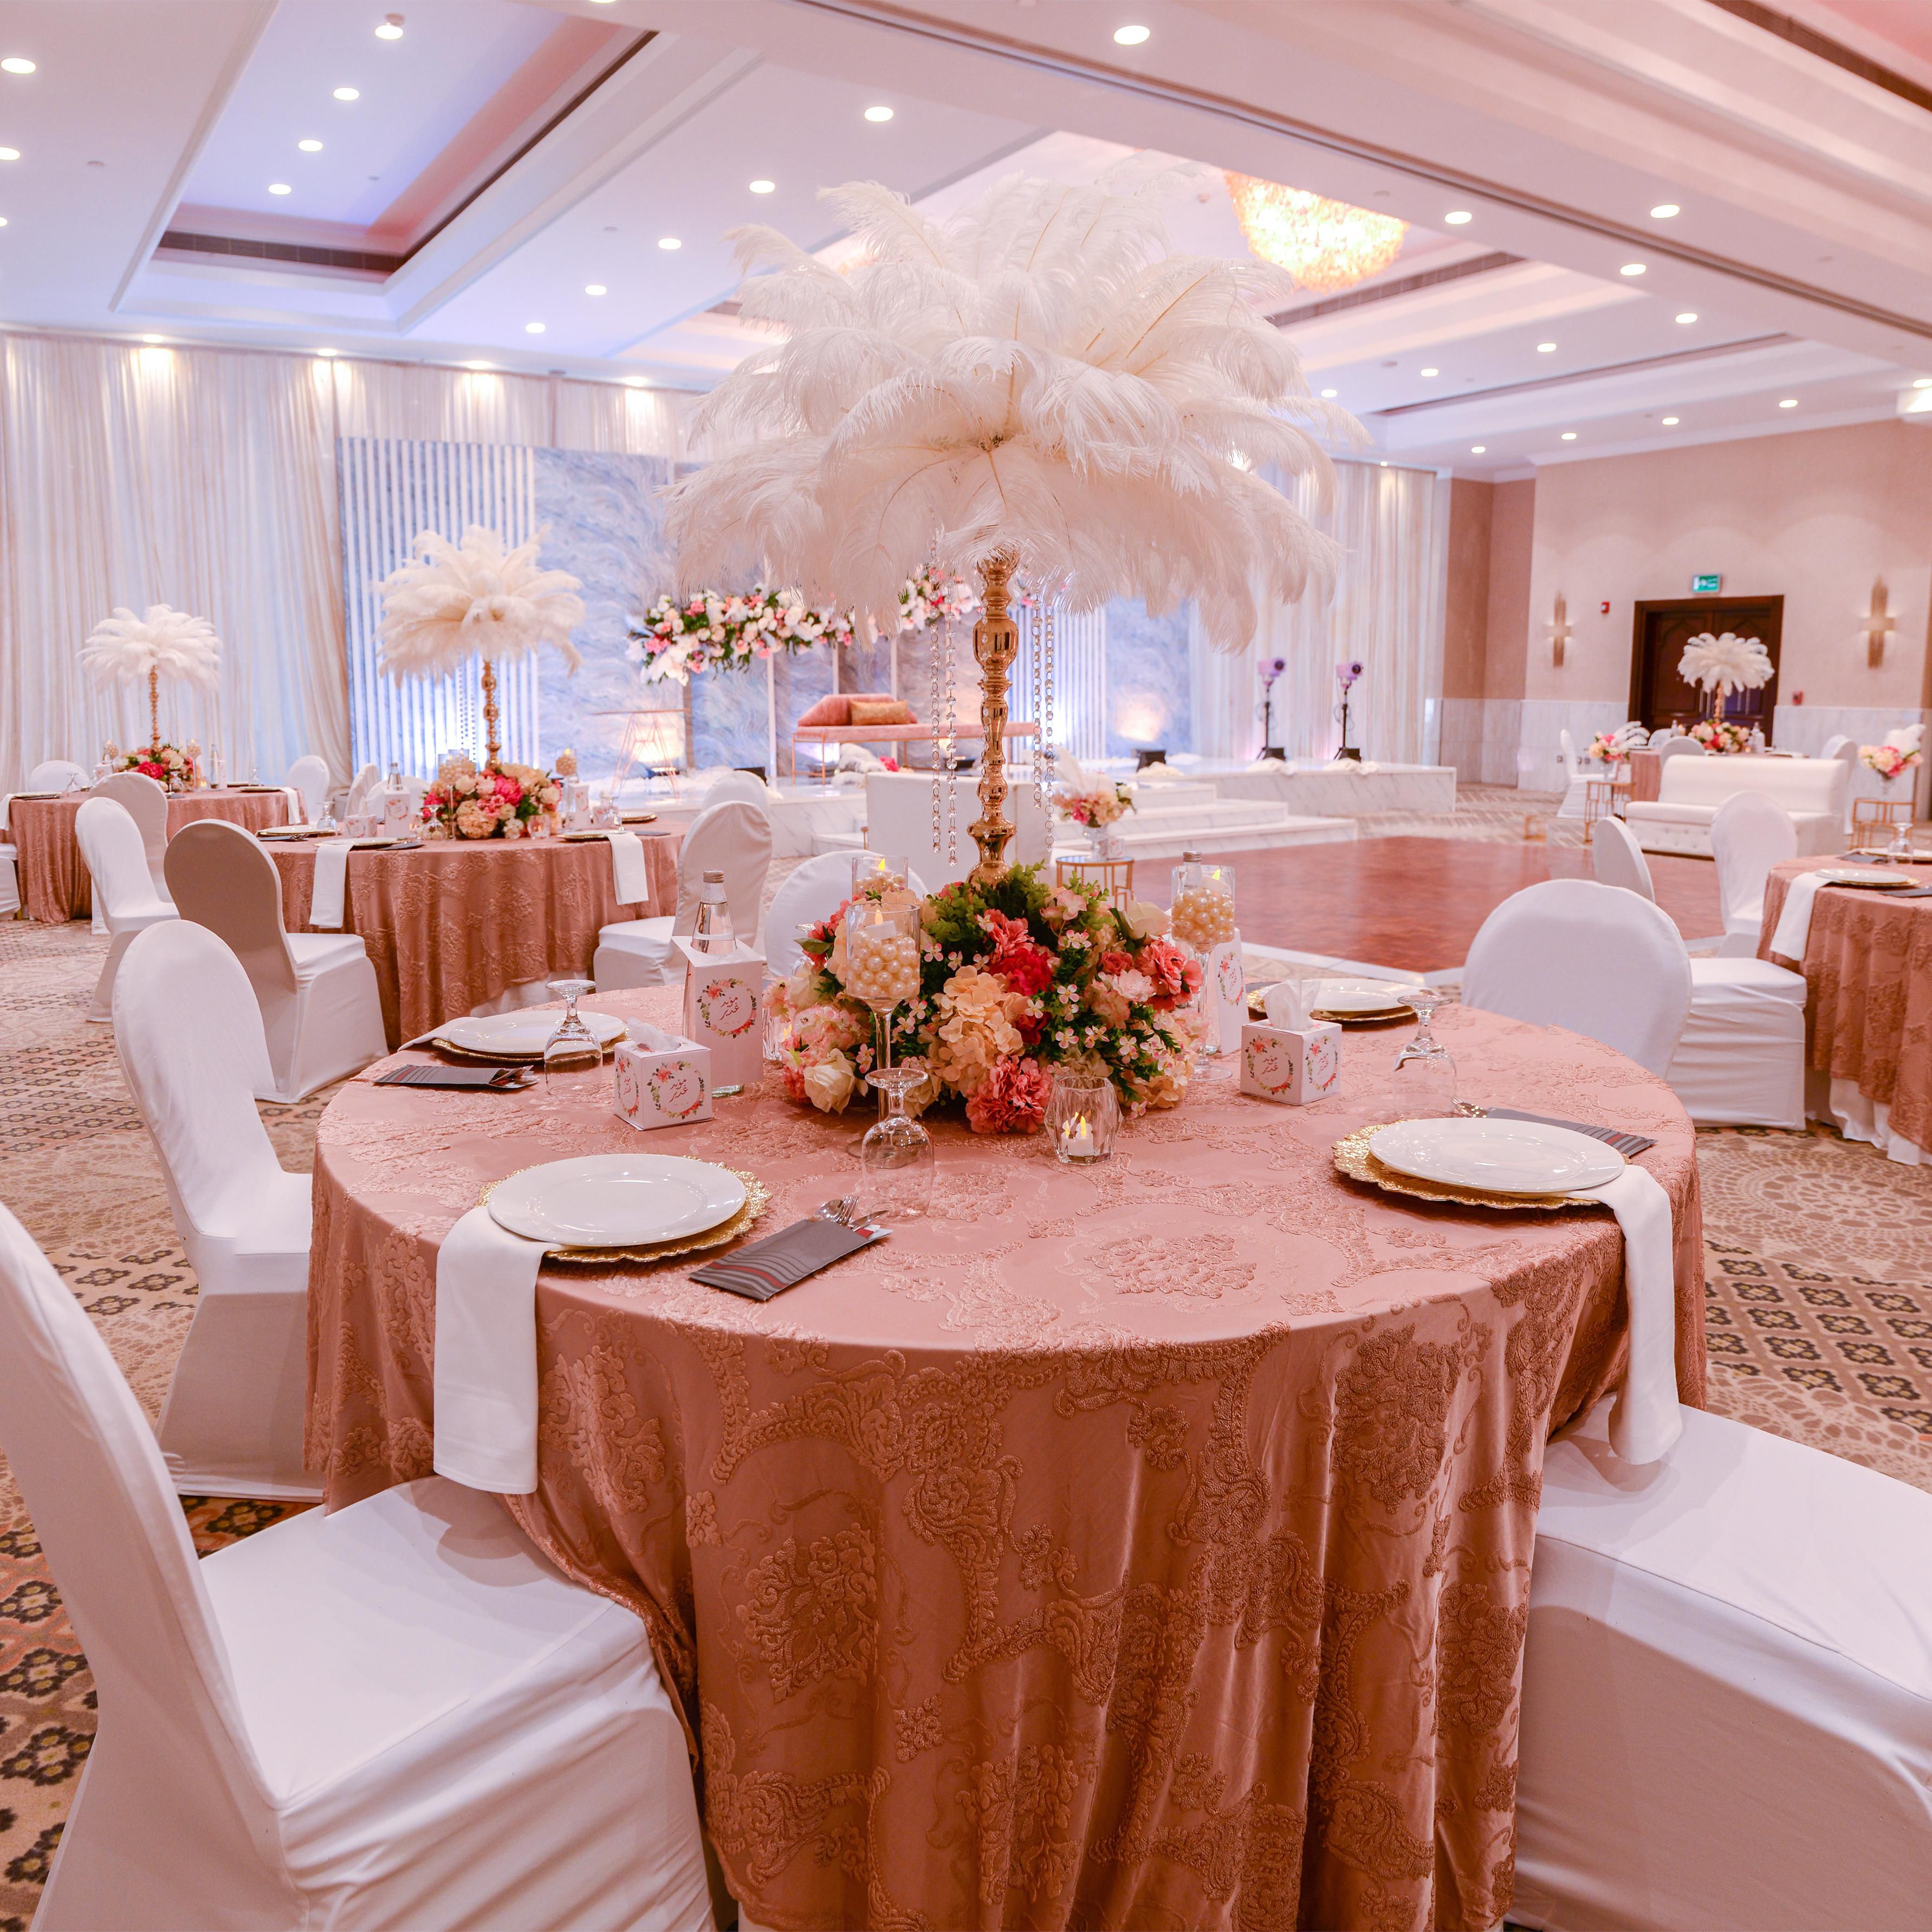 We will make your special day an unforgettable experience